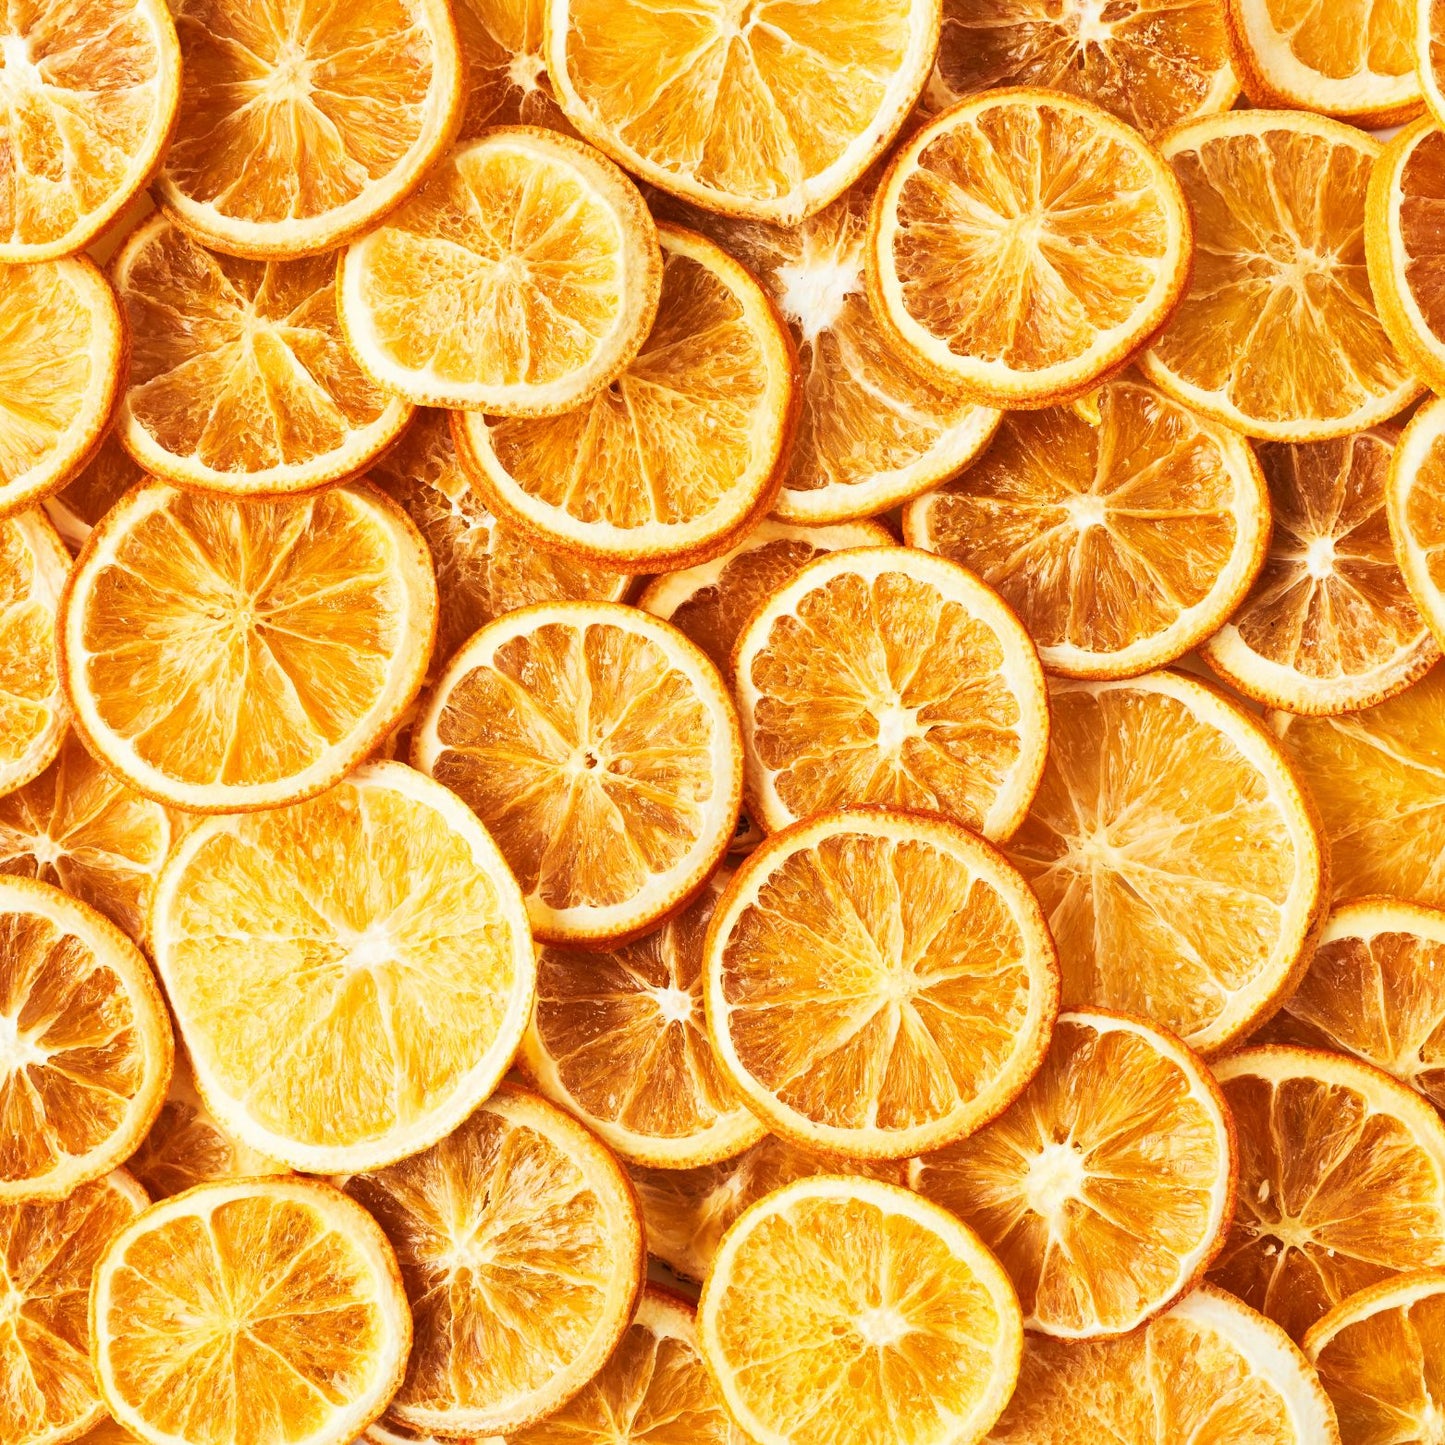 A vibrant close-up image of numerous Super Bargain Shop dehydrated orange wheel garnishes overlaid on each other, showcasing a range of rich orange hues and detailed textures.